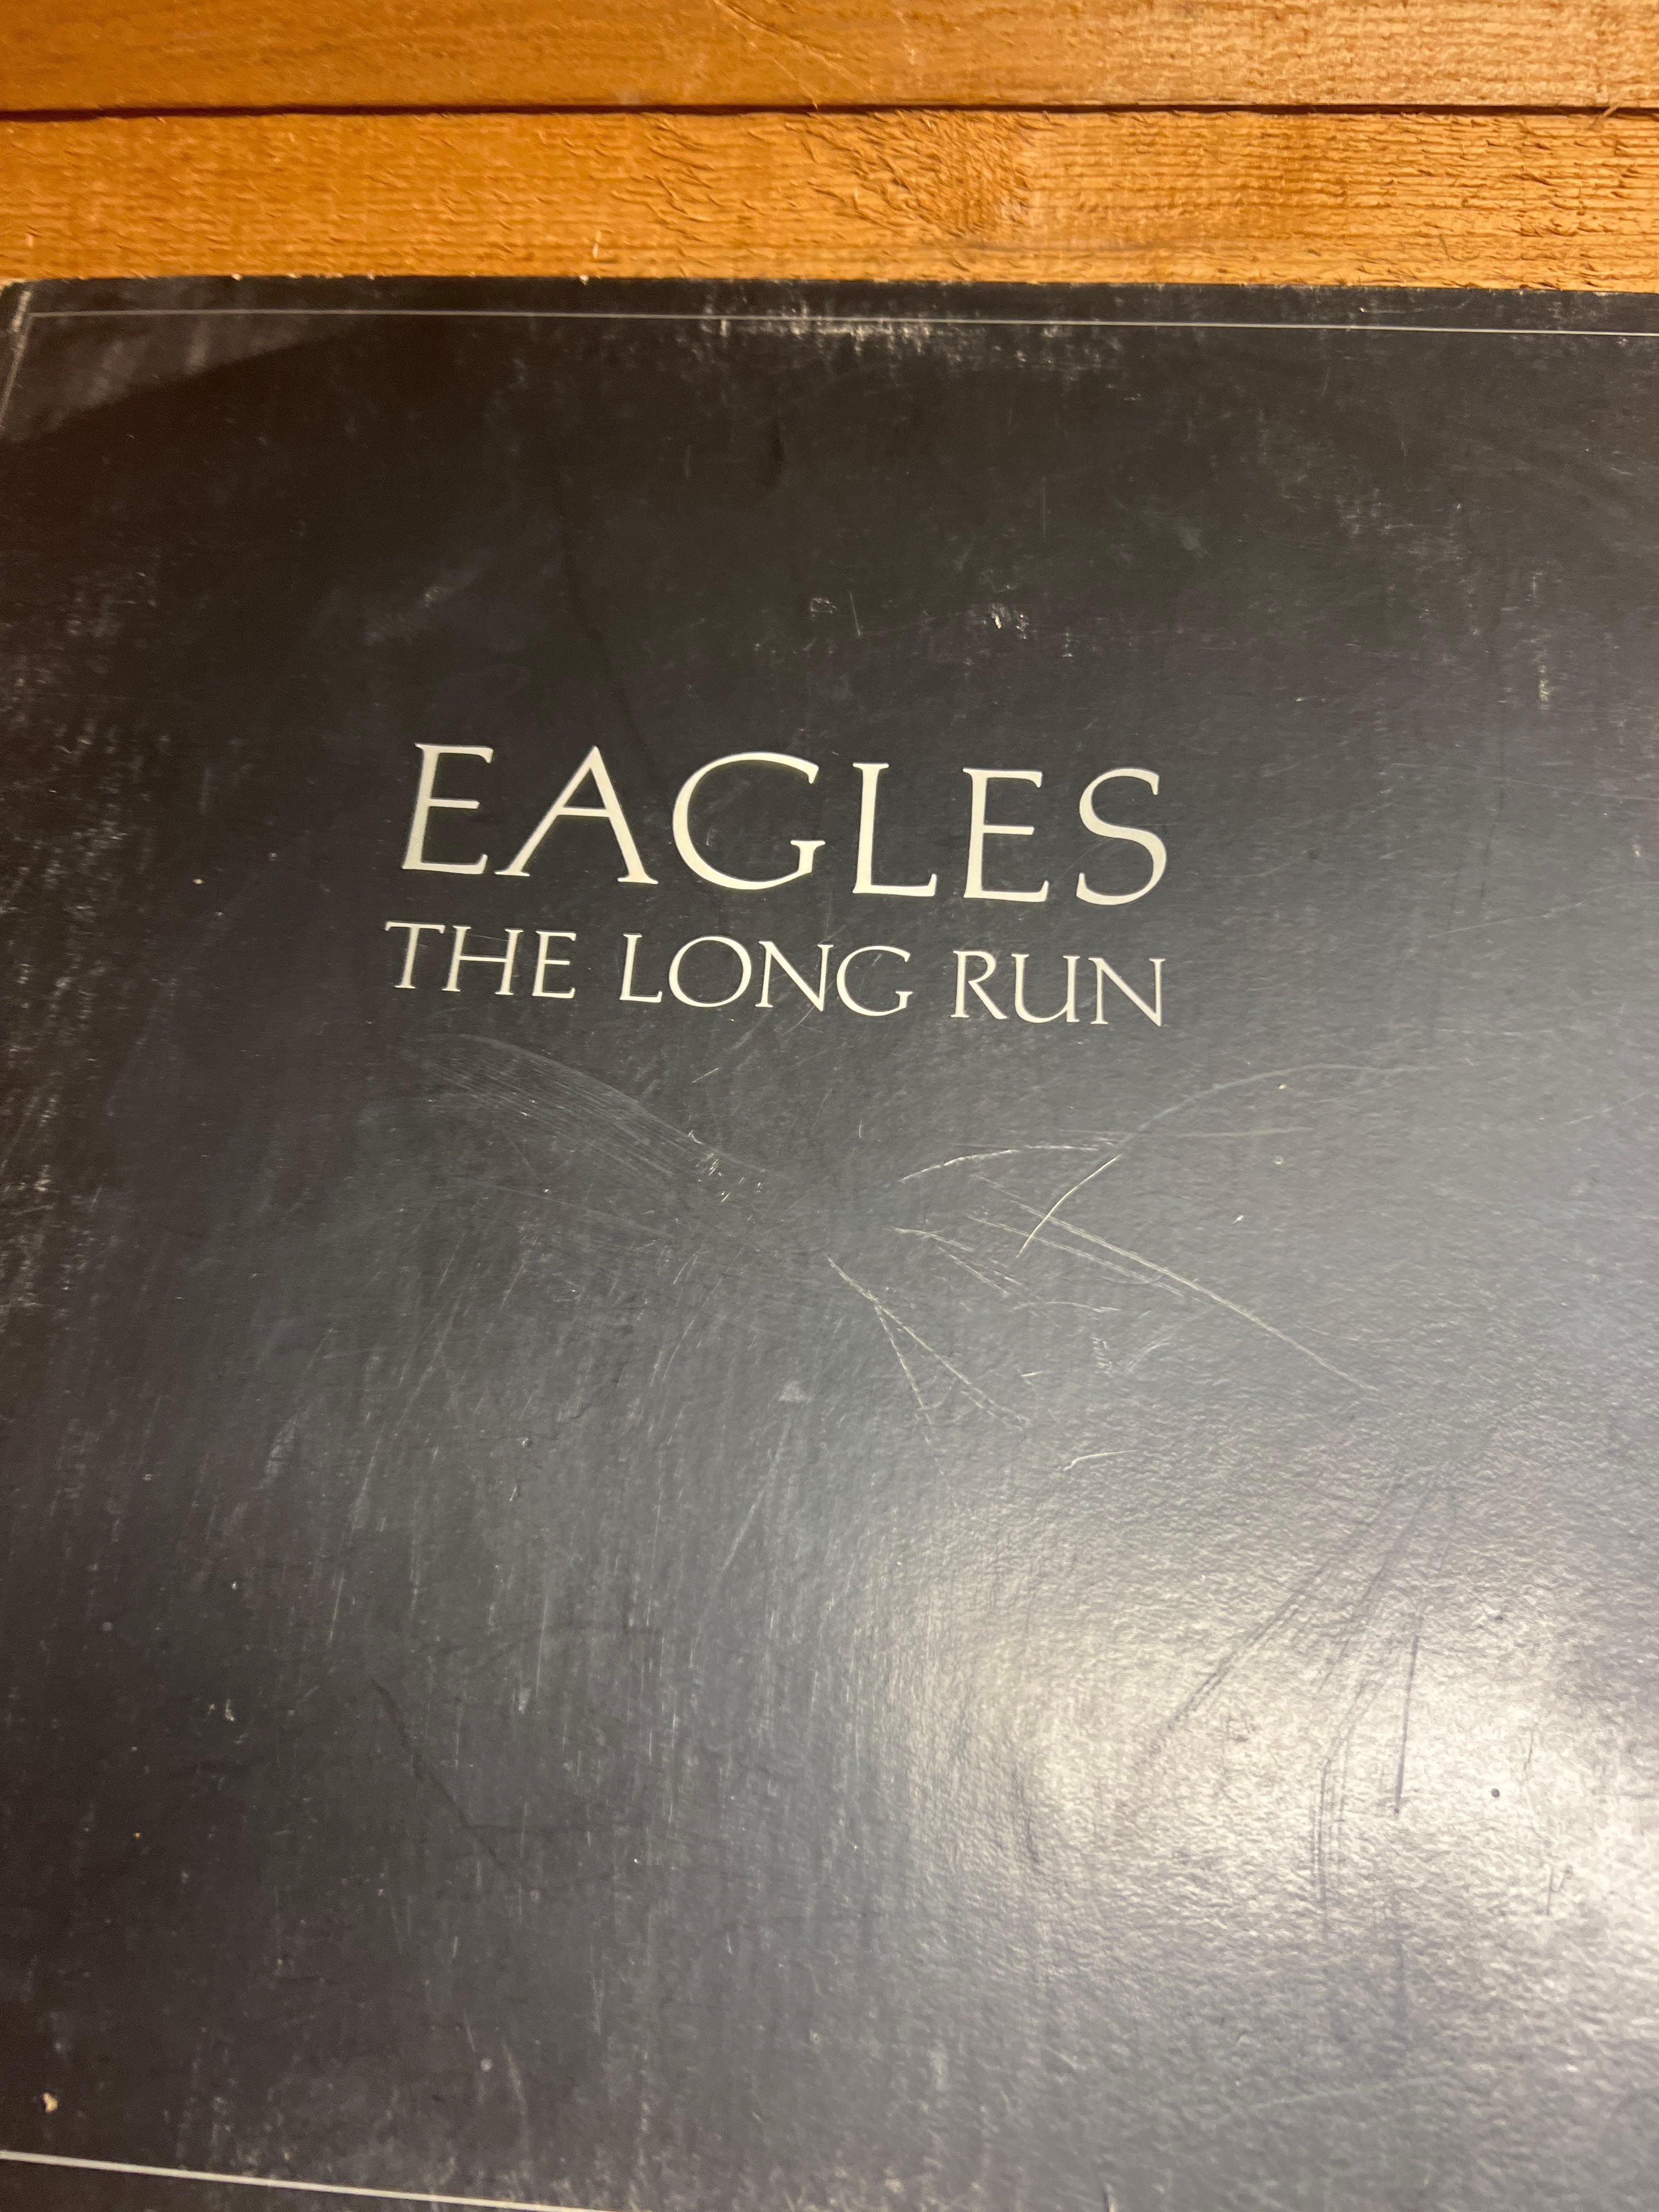 Contents of Shelf - 2 Clocks, Picture, Eagles Record, and Eric Clapton Record